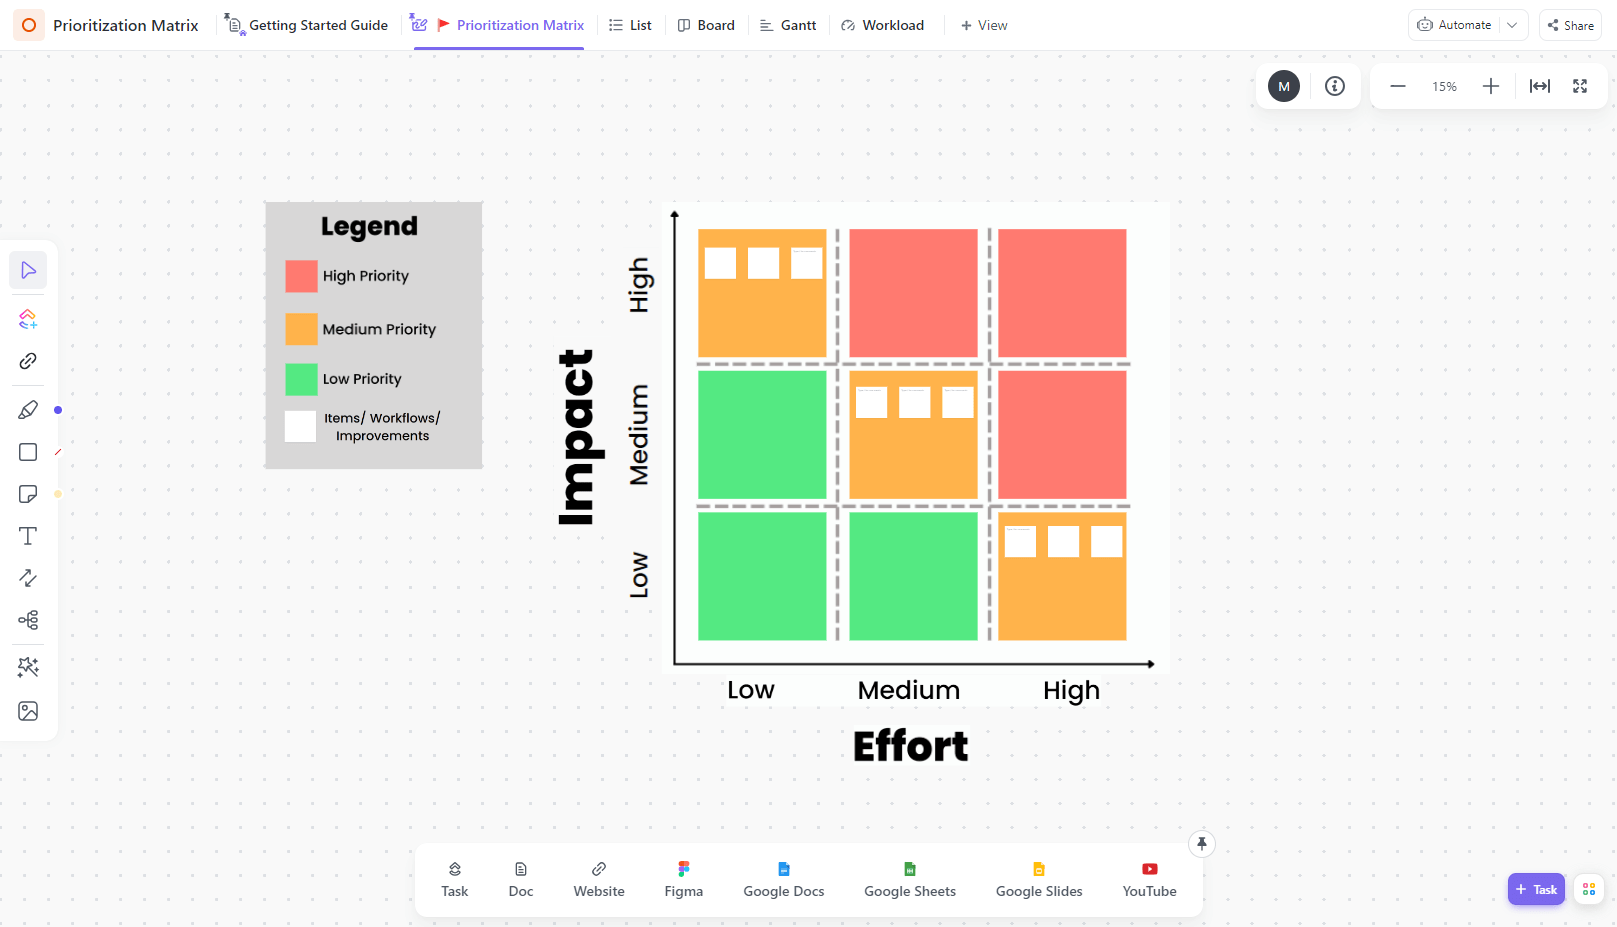 Prioritize items as per effort and impact with the Prioritization Matrix Template